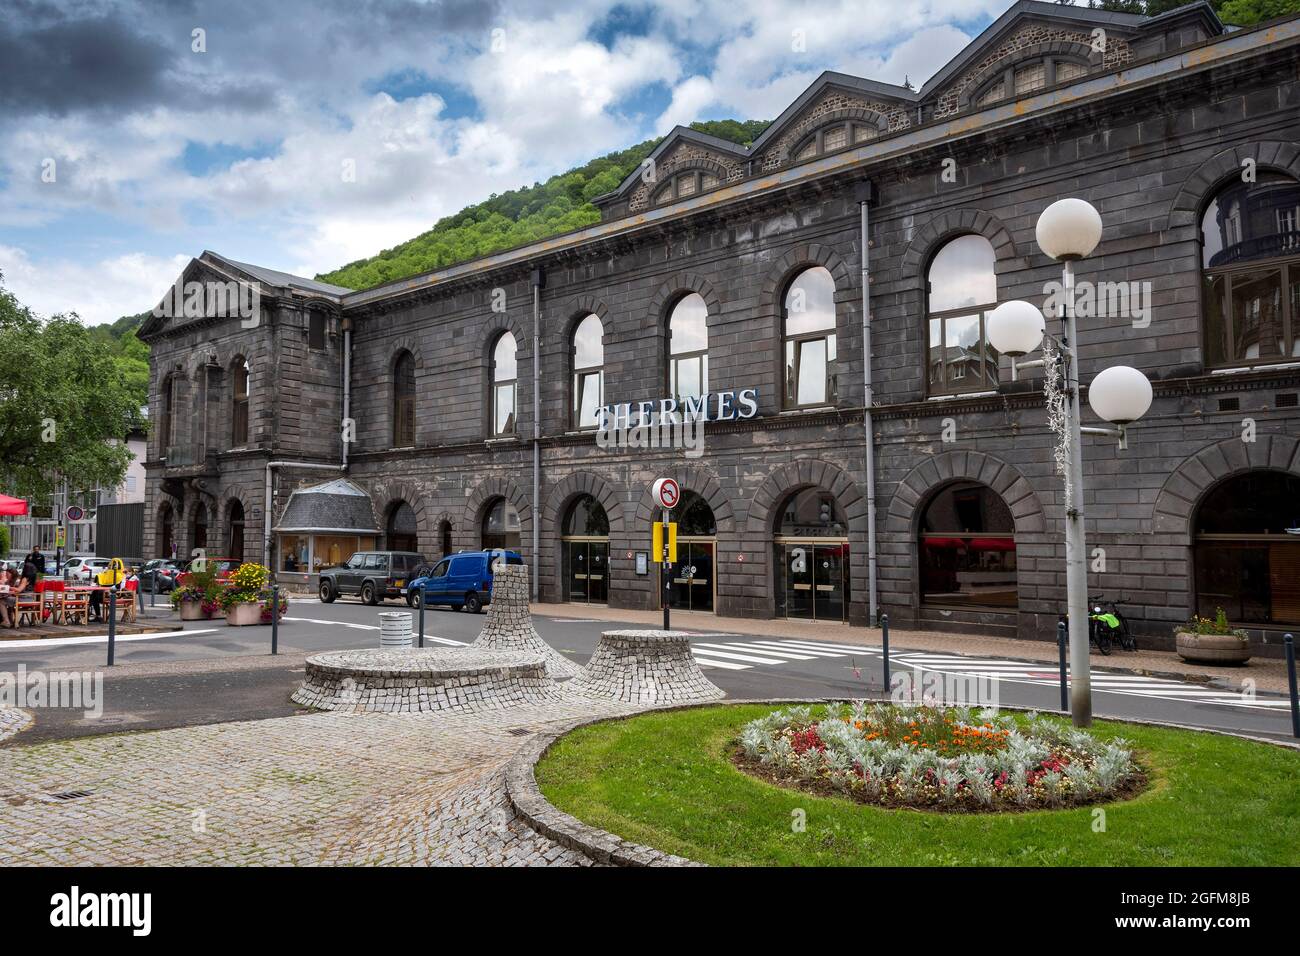 The Spa building in the Neo-Byzantine style at Le Mont-Dore, Auvergne Volcanoes Natural Park, Puy de Dome department, Auvergne Rhone Alpes, France Stock Photo